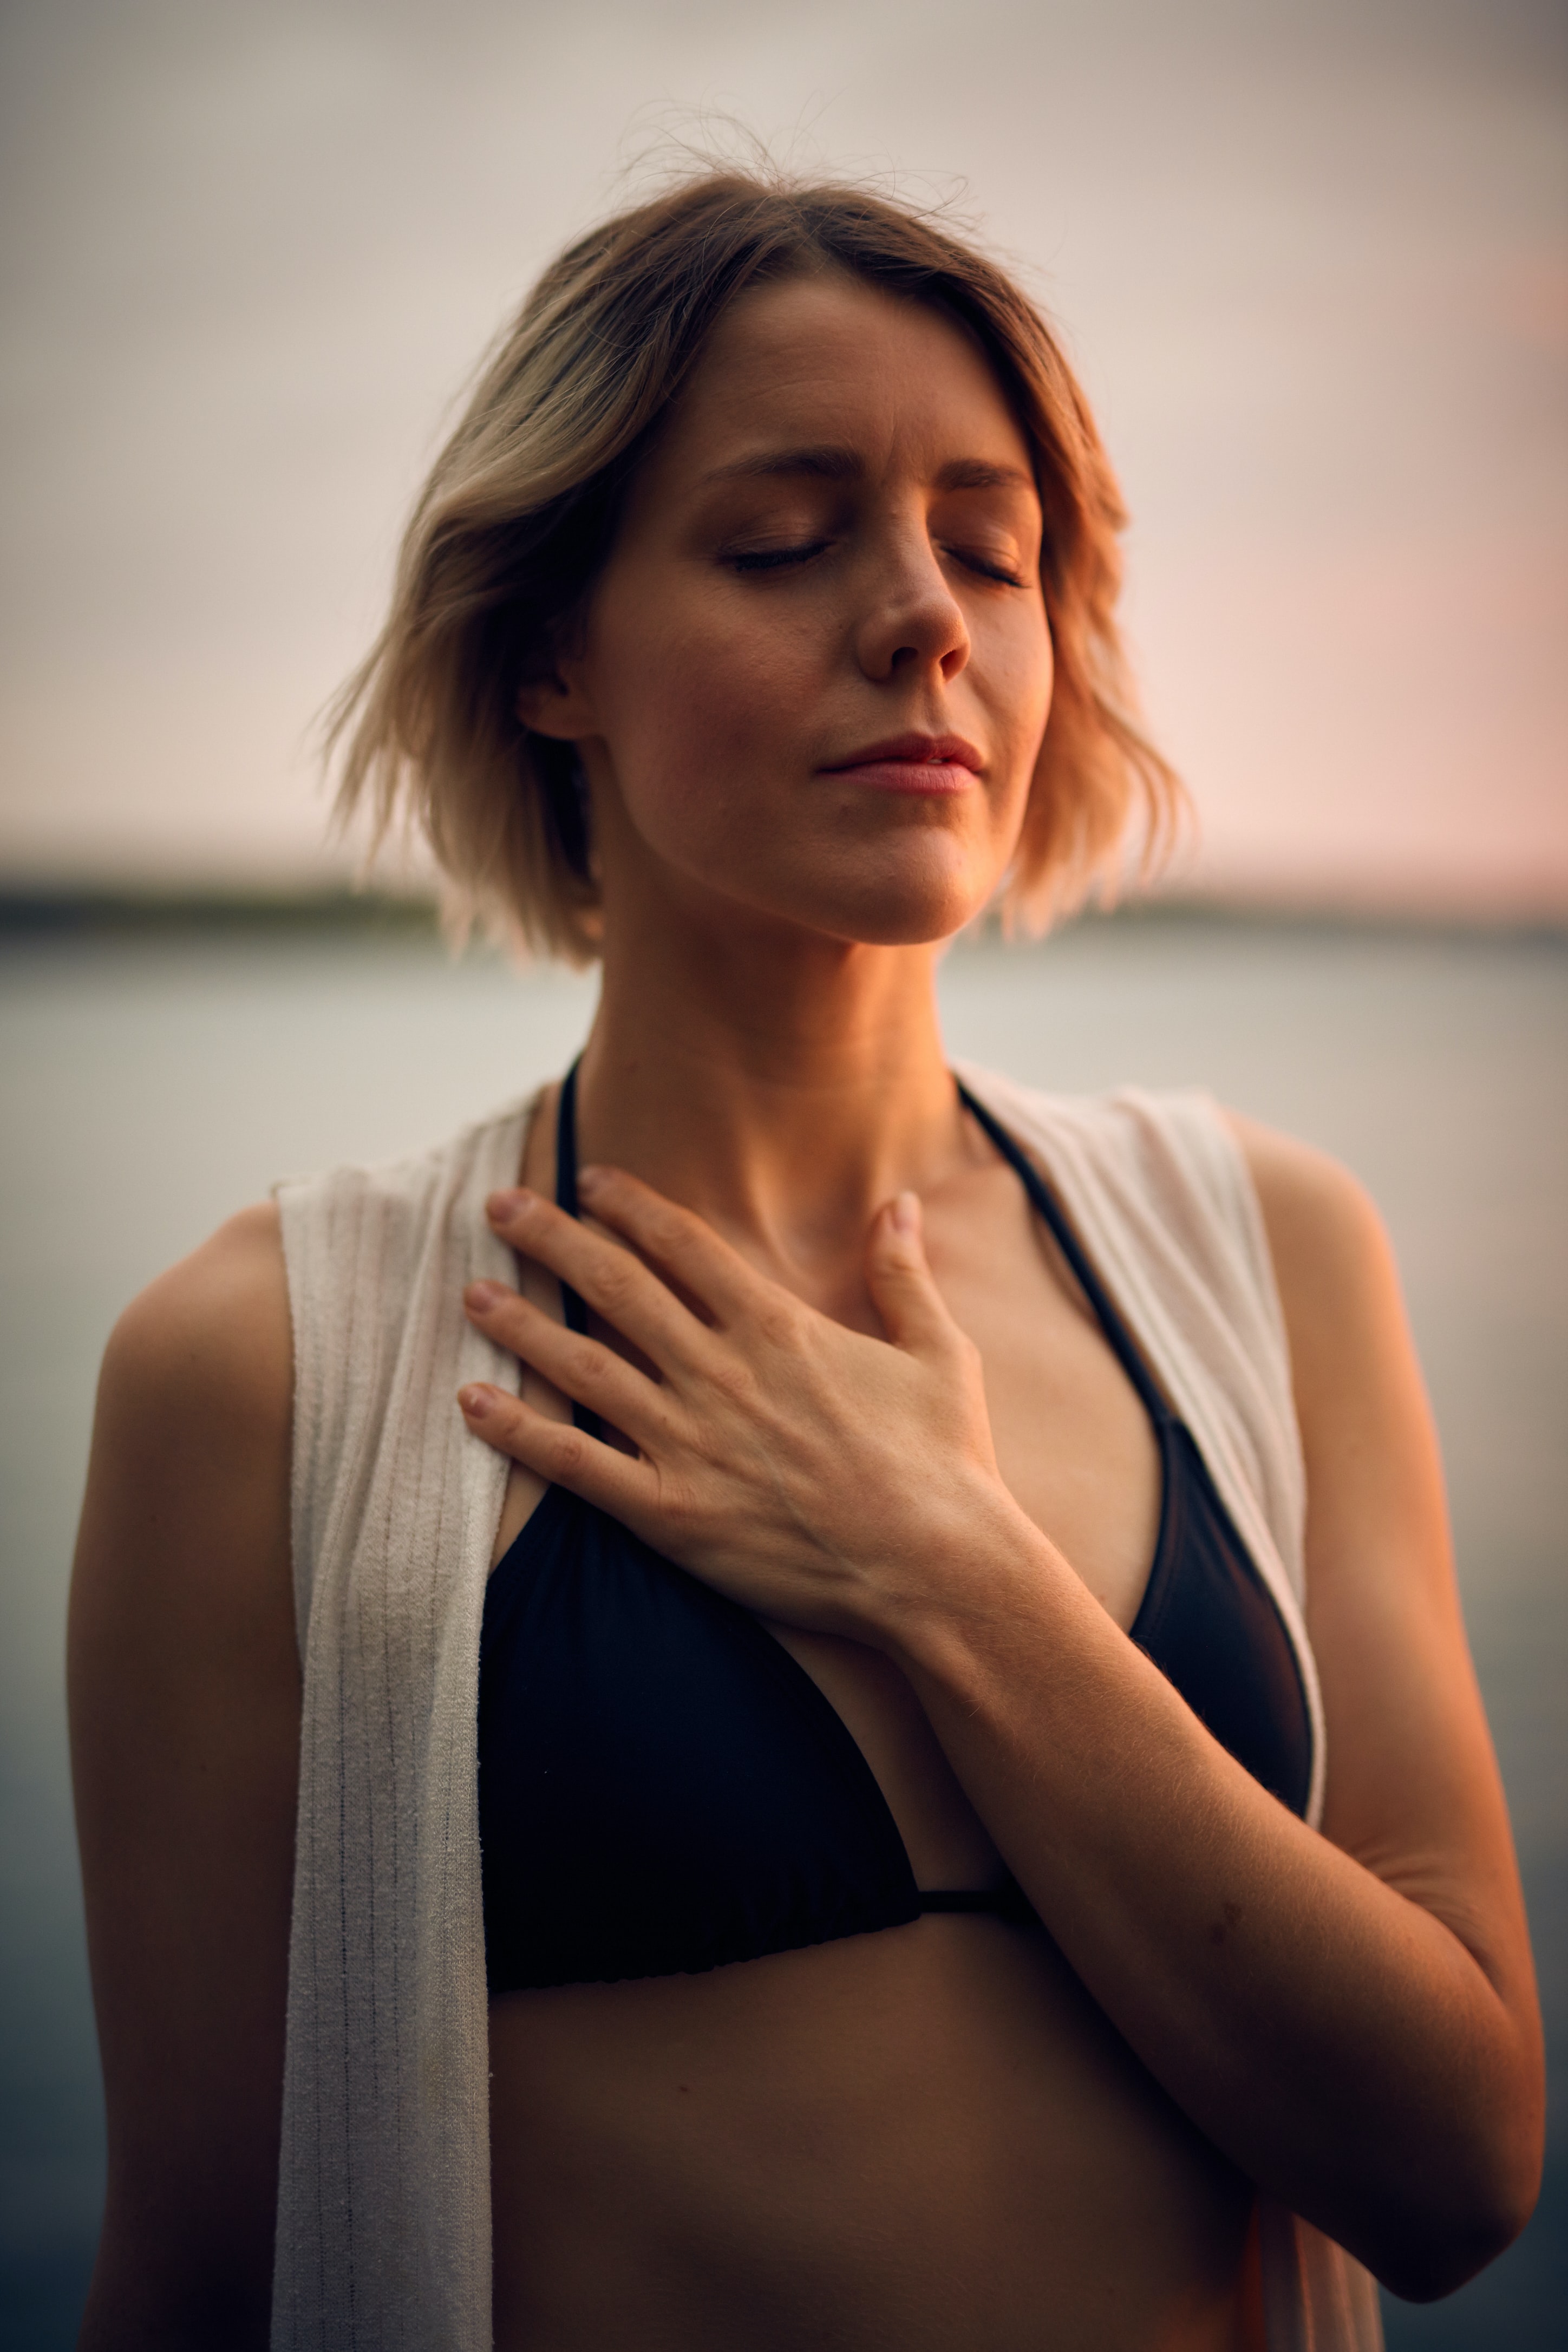 Breathe wrong, breathing wrong, how to breathe correctly